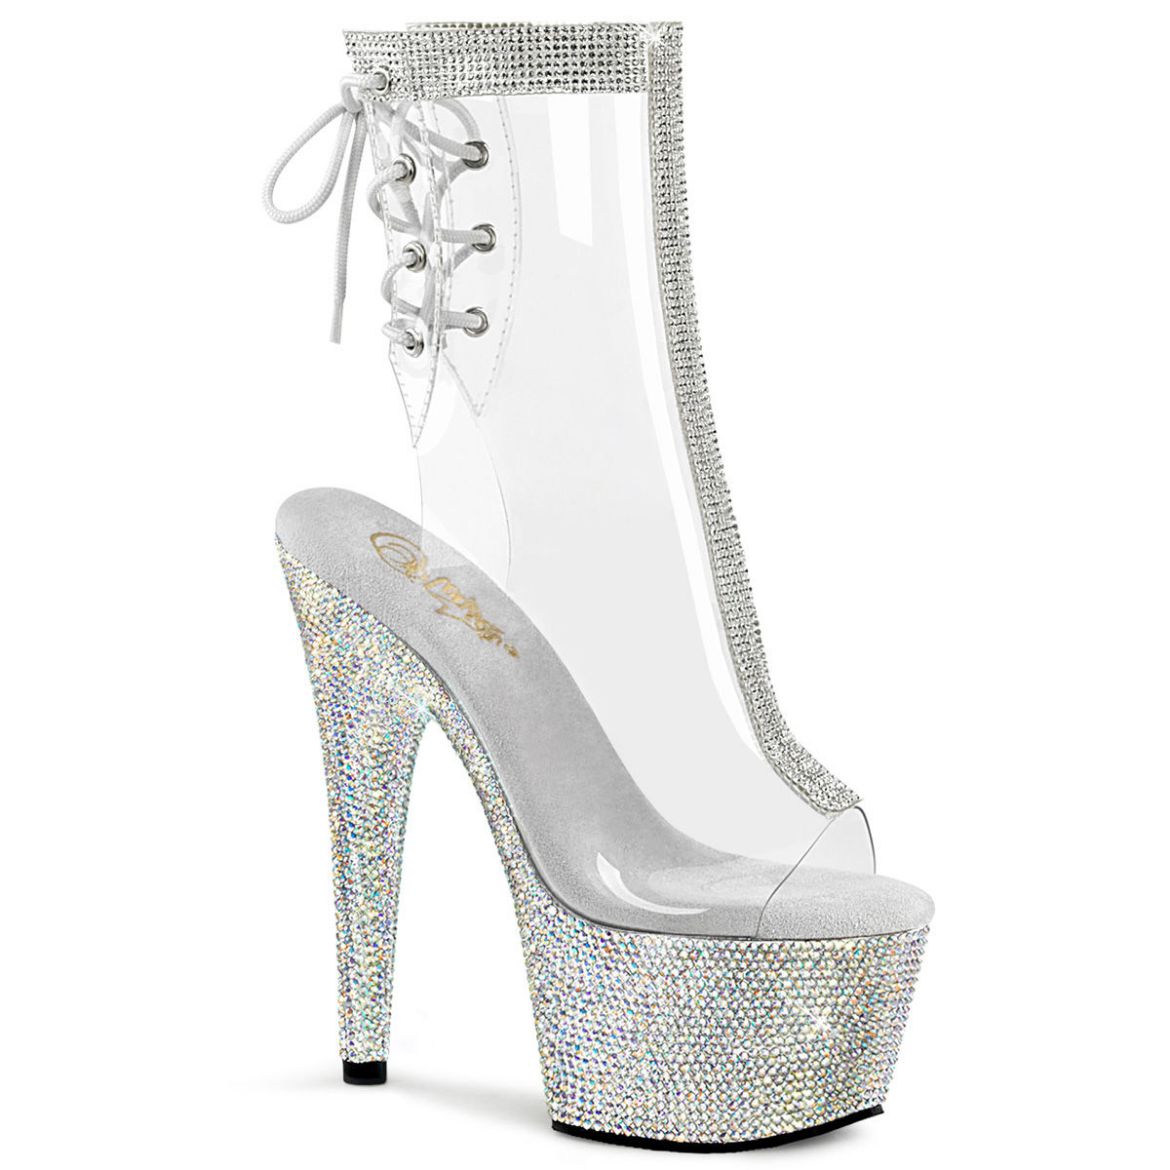 Product image of Pleaser BEJEWELED-1018C-2RS Clear/Silver Rhinestones 7 inch (17.8 cm) Heel 2 3/4 inch (7 cm) Platform Open Toe/Heel Ankle Boot With Rhinestones